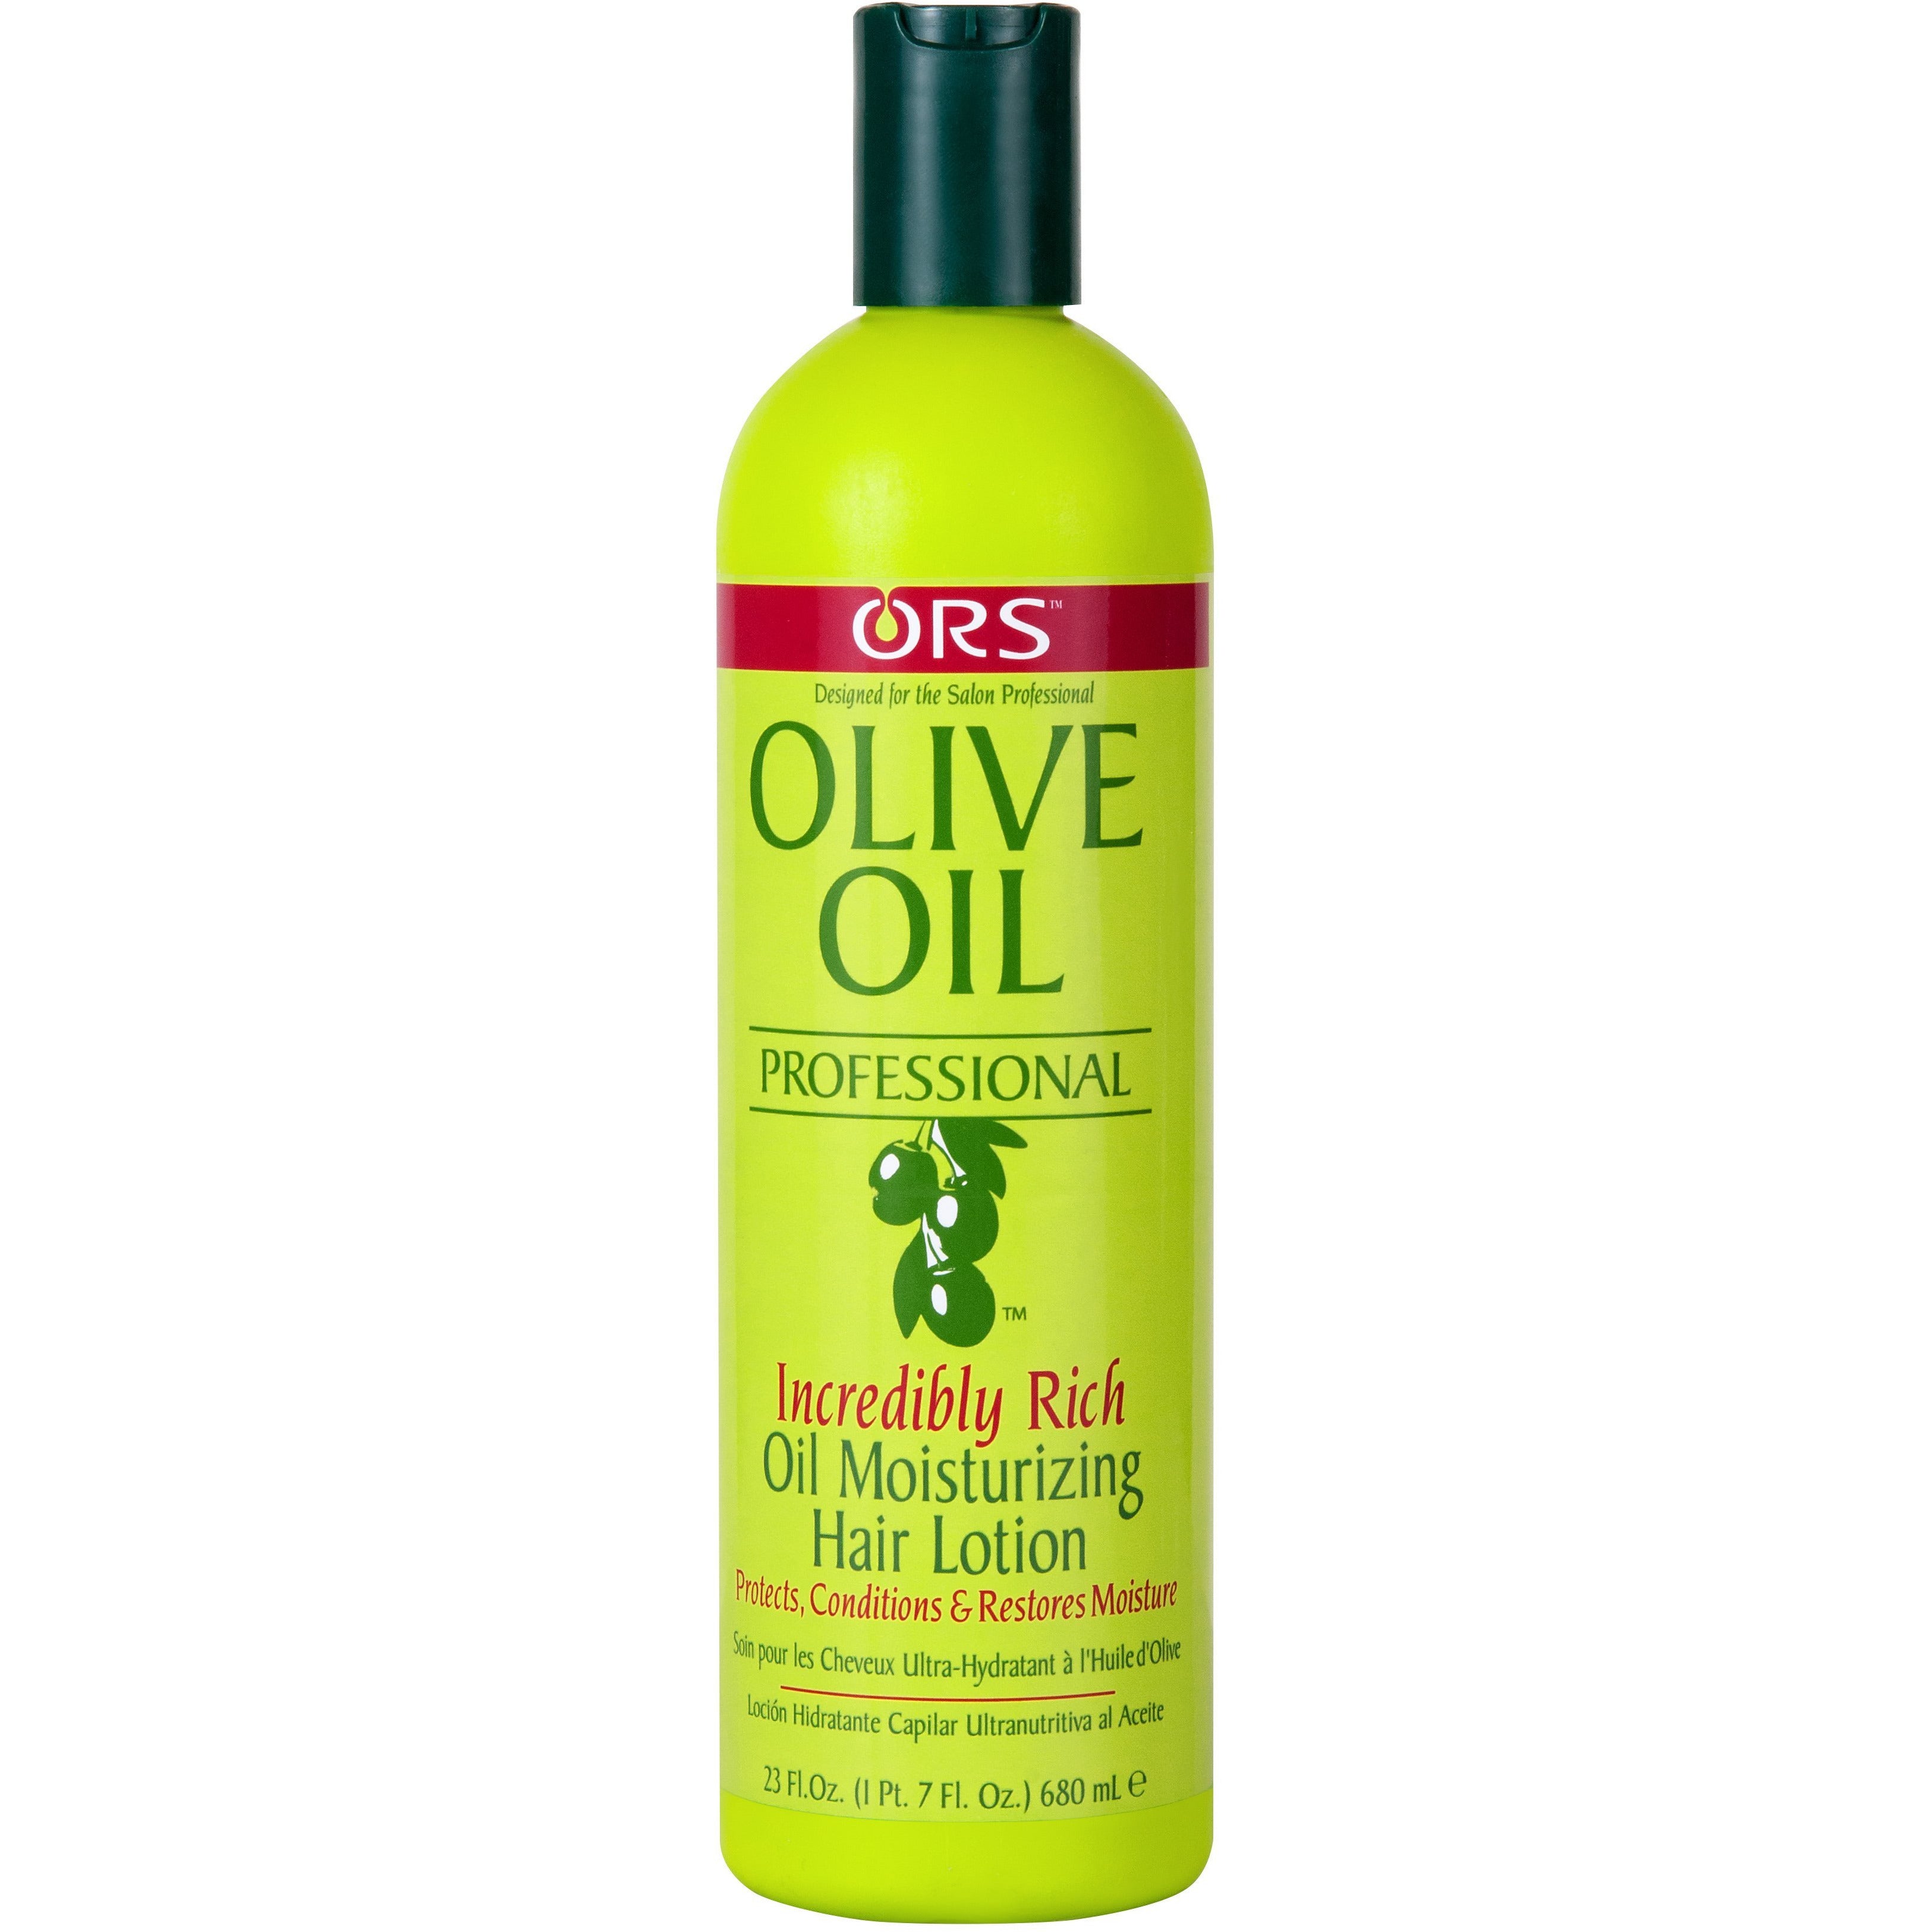 4th Ave Market: Organic Root Stimulator Olive Oil Incredibly Rich Oil Moisturizing Hair Lotion, 23 O